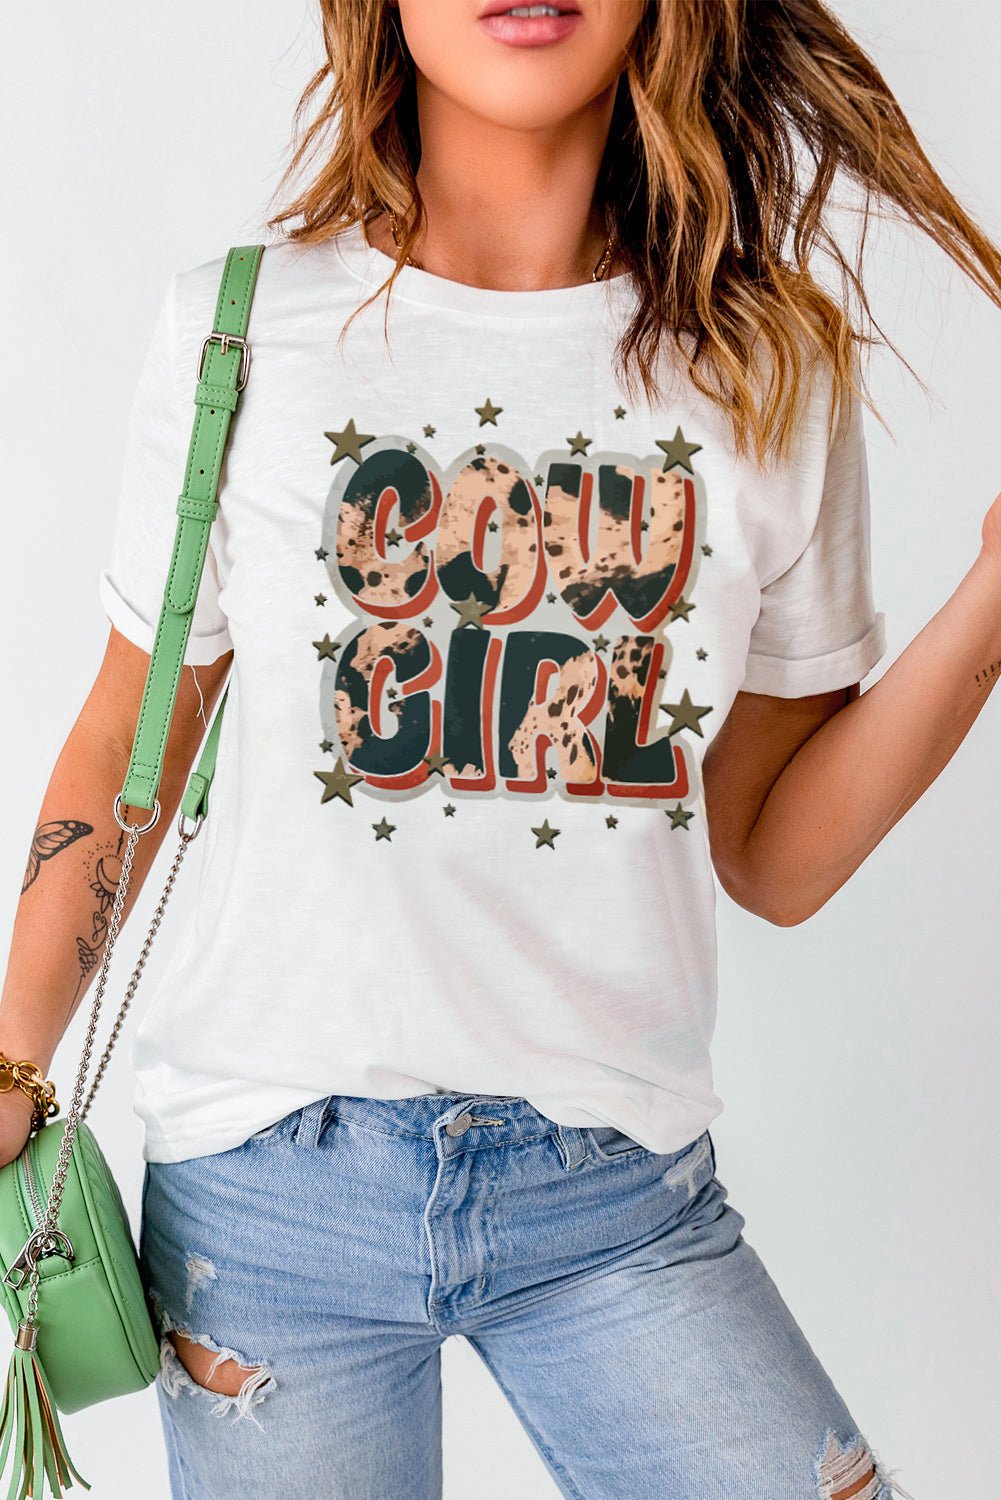 Journey of the Heart - Embrace Your Bohemian Spirit in our COWGIRL Graphic Tee - Luxurious Comfort and Flattering Shape for Endless Adventures - Guy Christopher